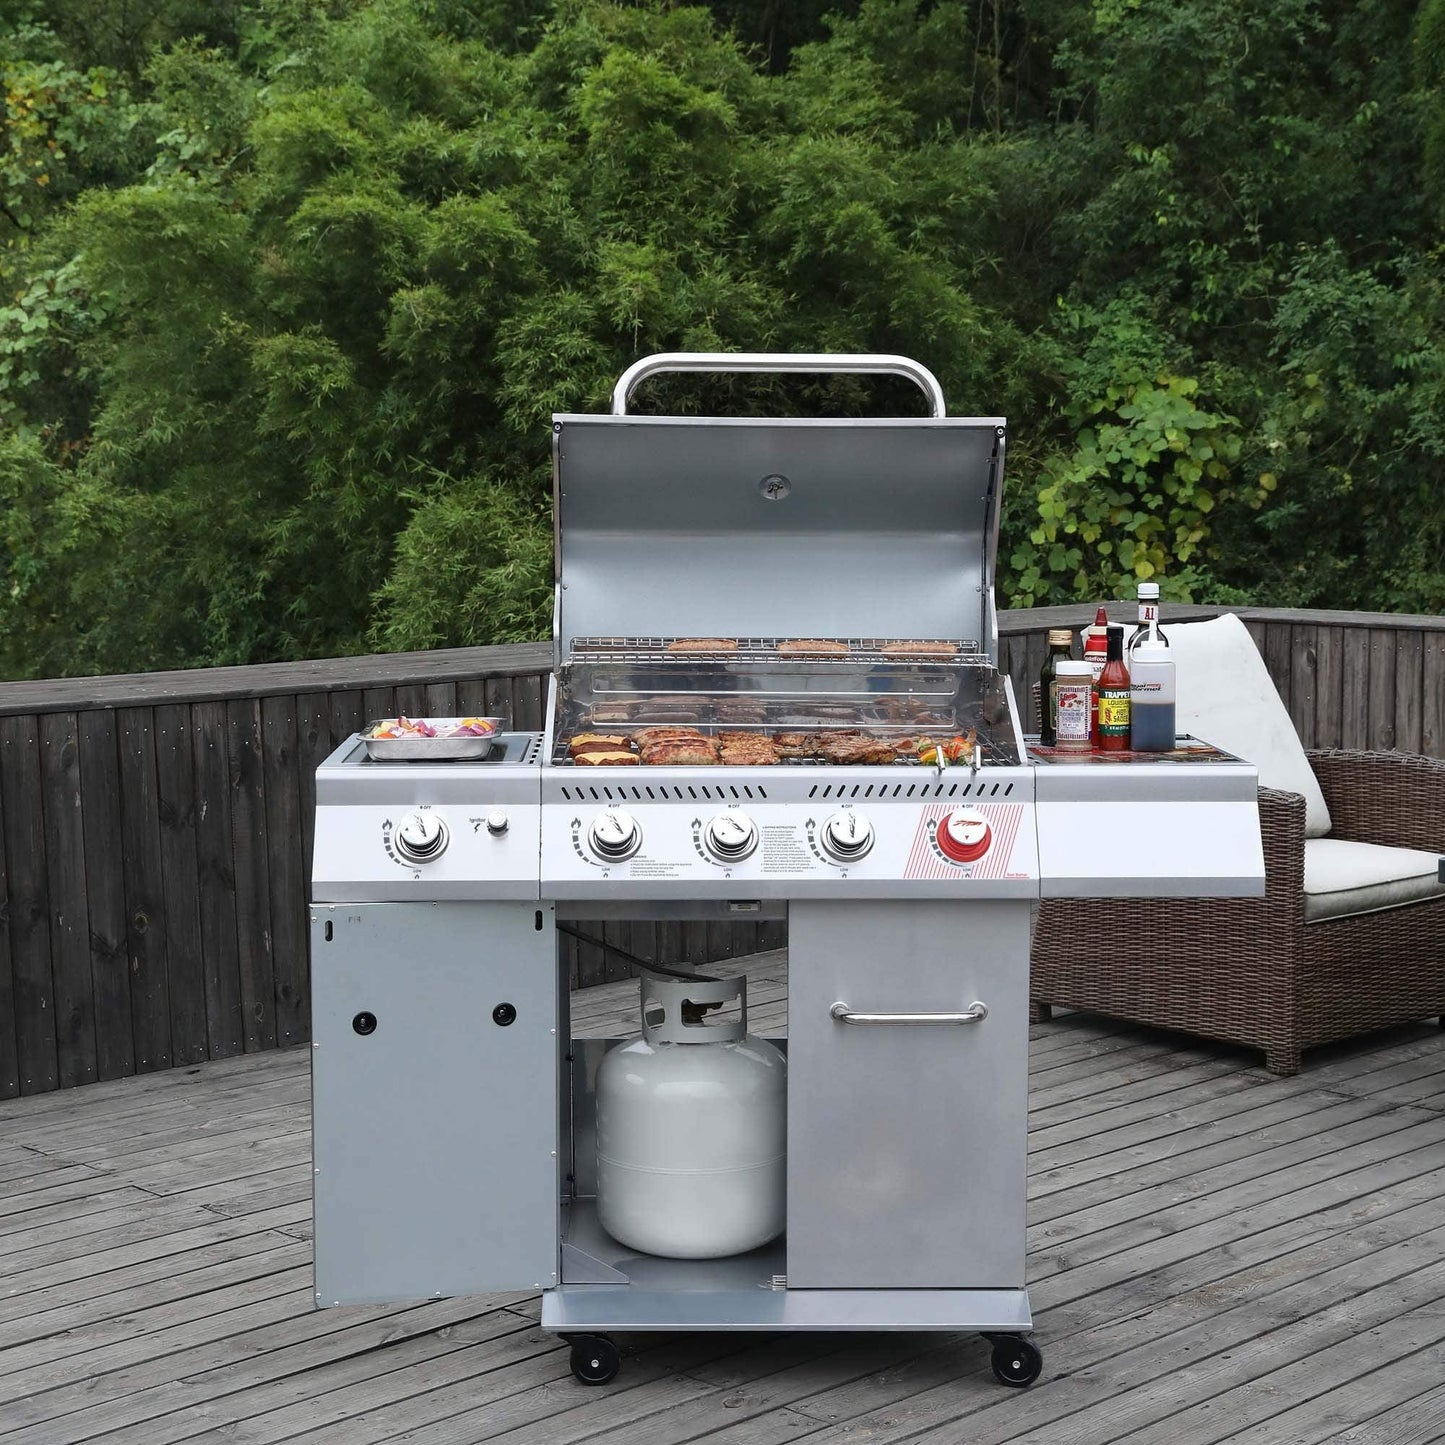 Royal Gourmet GA4402S Stainless Steel 4-Burner BBQ Propane Gas Grill, 54000 BTU Cabinet Style Gas Grill with Sear Burner and Side Burner, Perfect for Patio Garden Picnic Backyard Party, Silver - CookCave